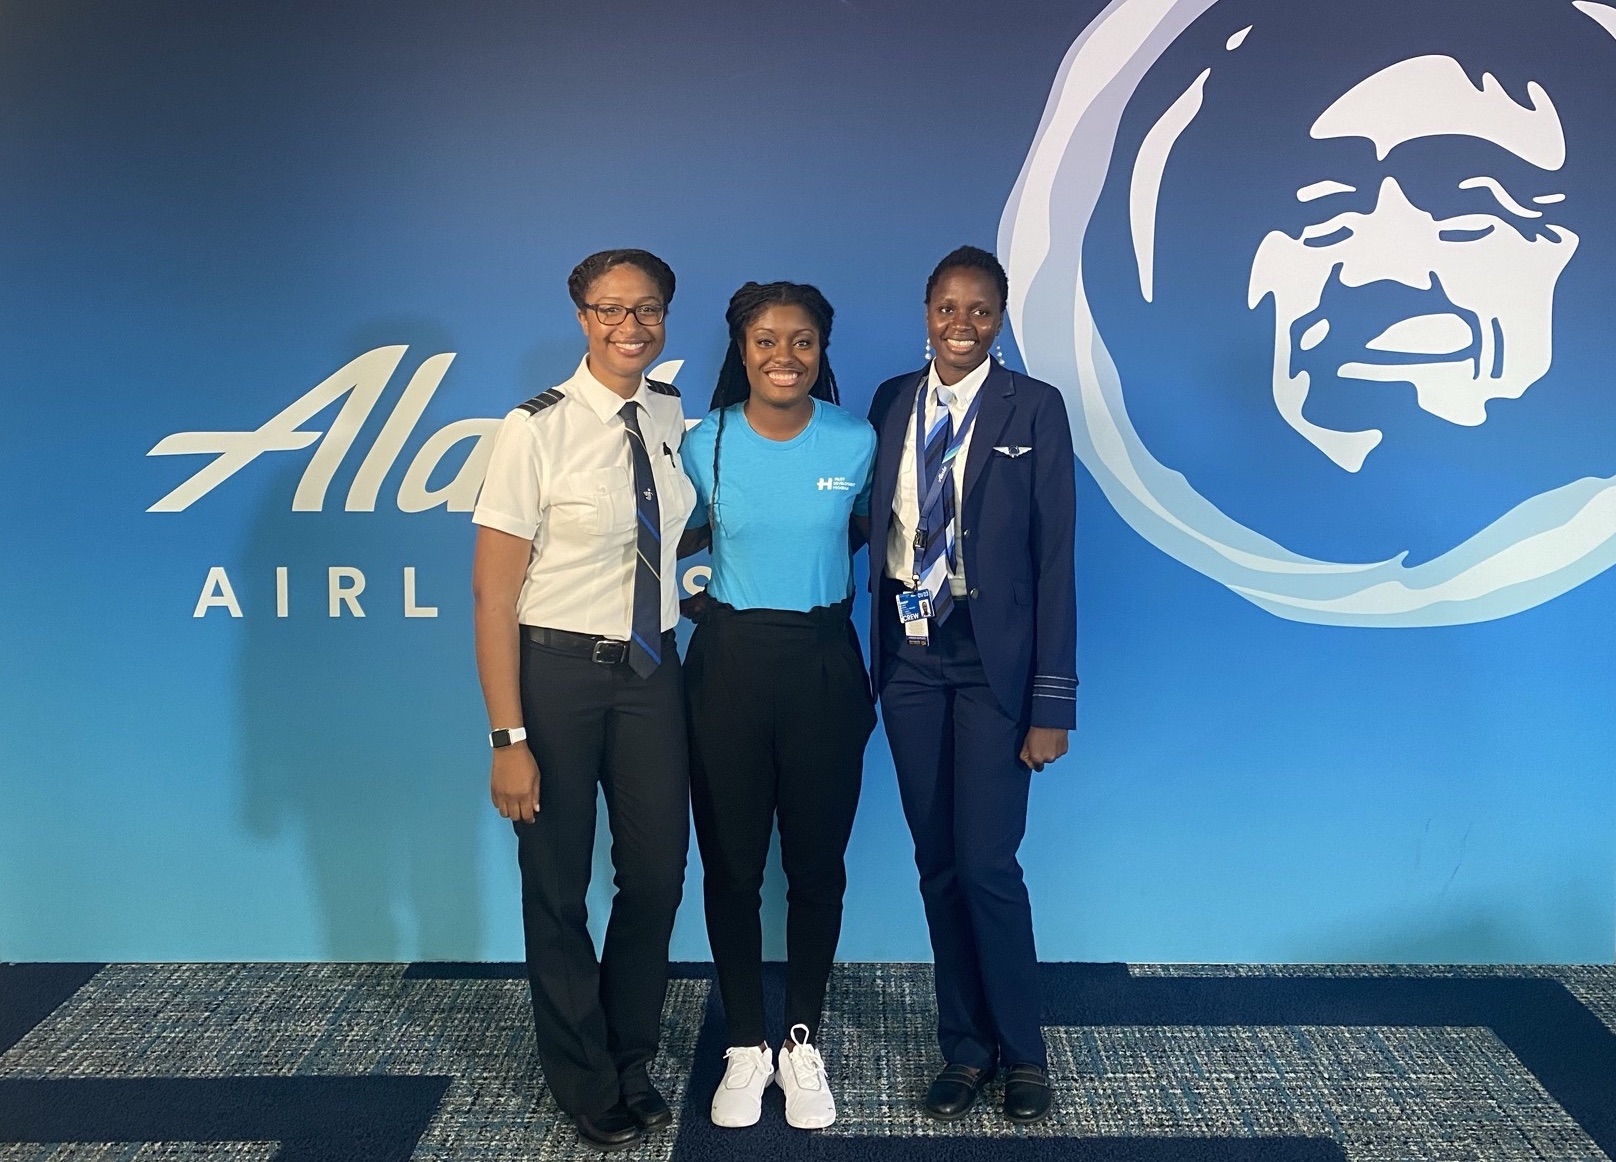 Three women stand together smiling in front of an blue background with Alaska Airlines on it